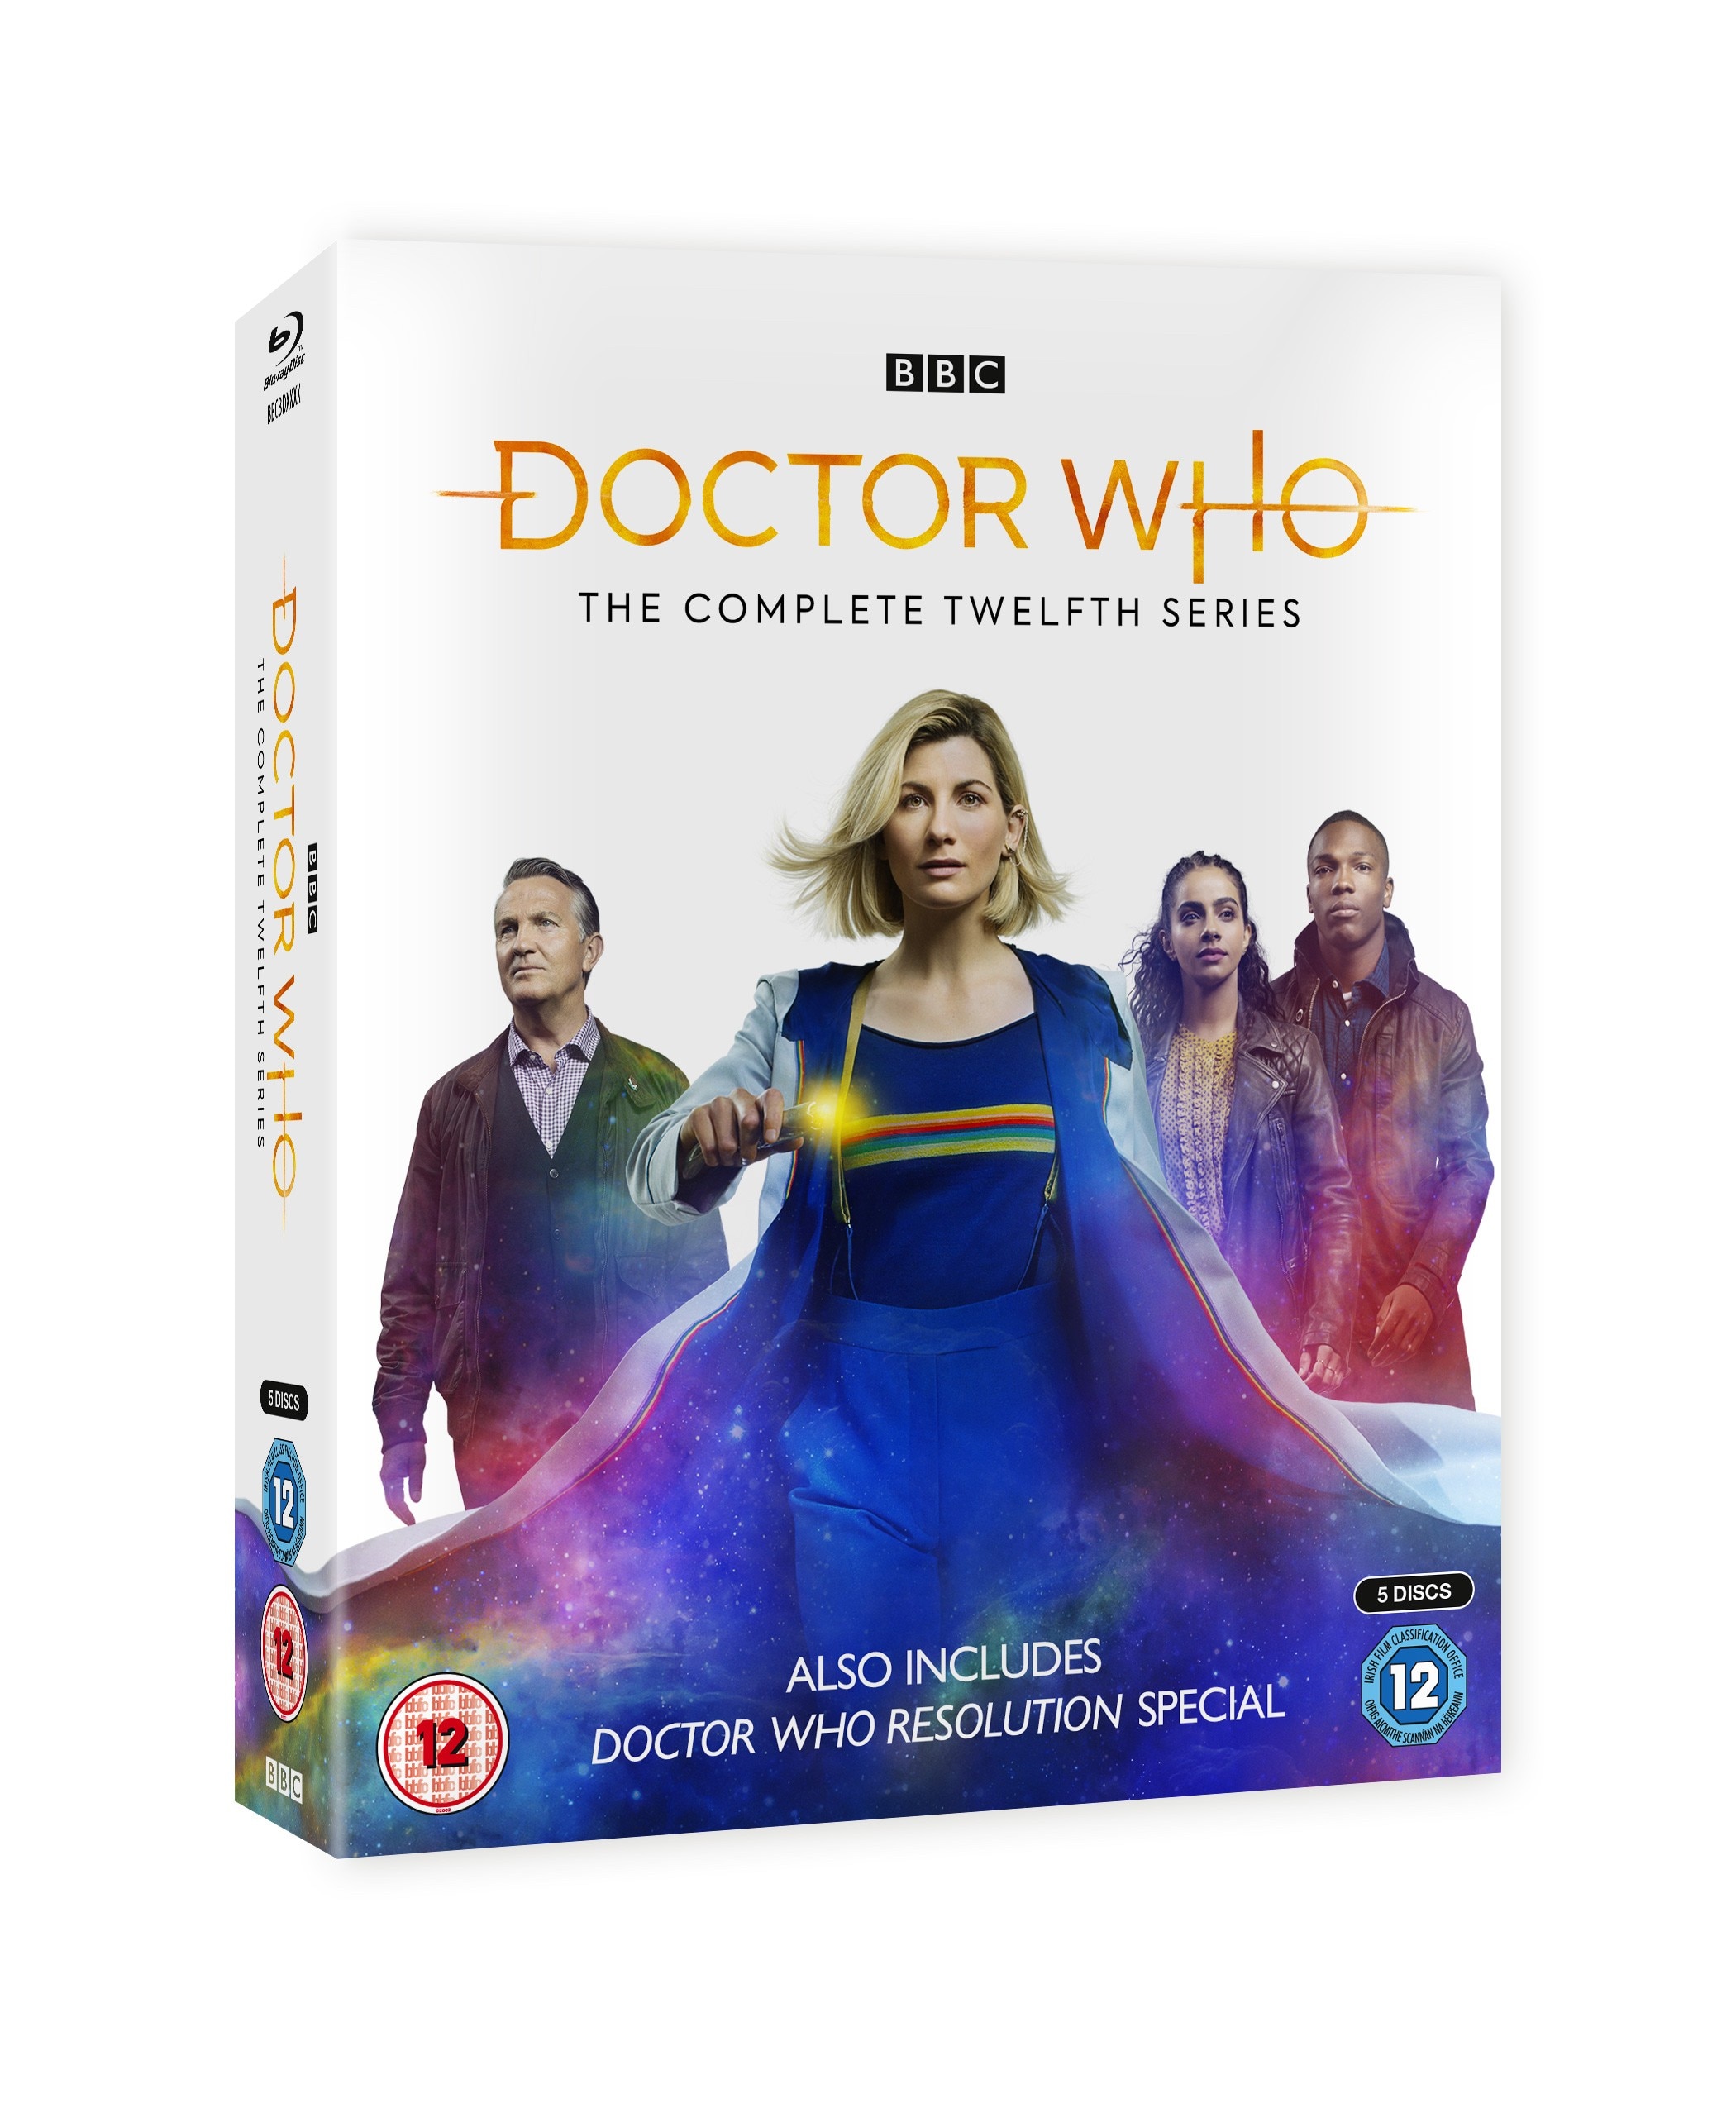 Doctor Who Series 12 will be available on DVD and Blu-ray from 4th May 2020